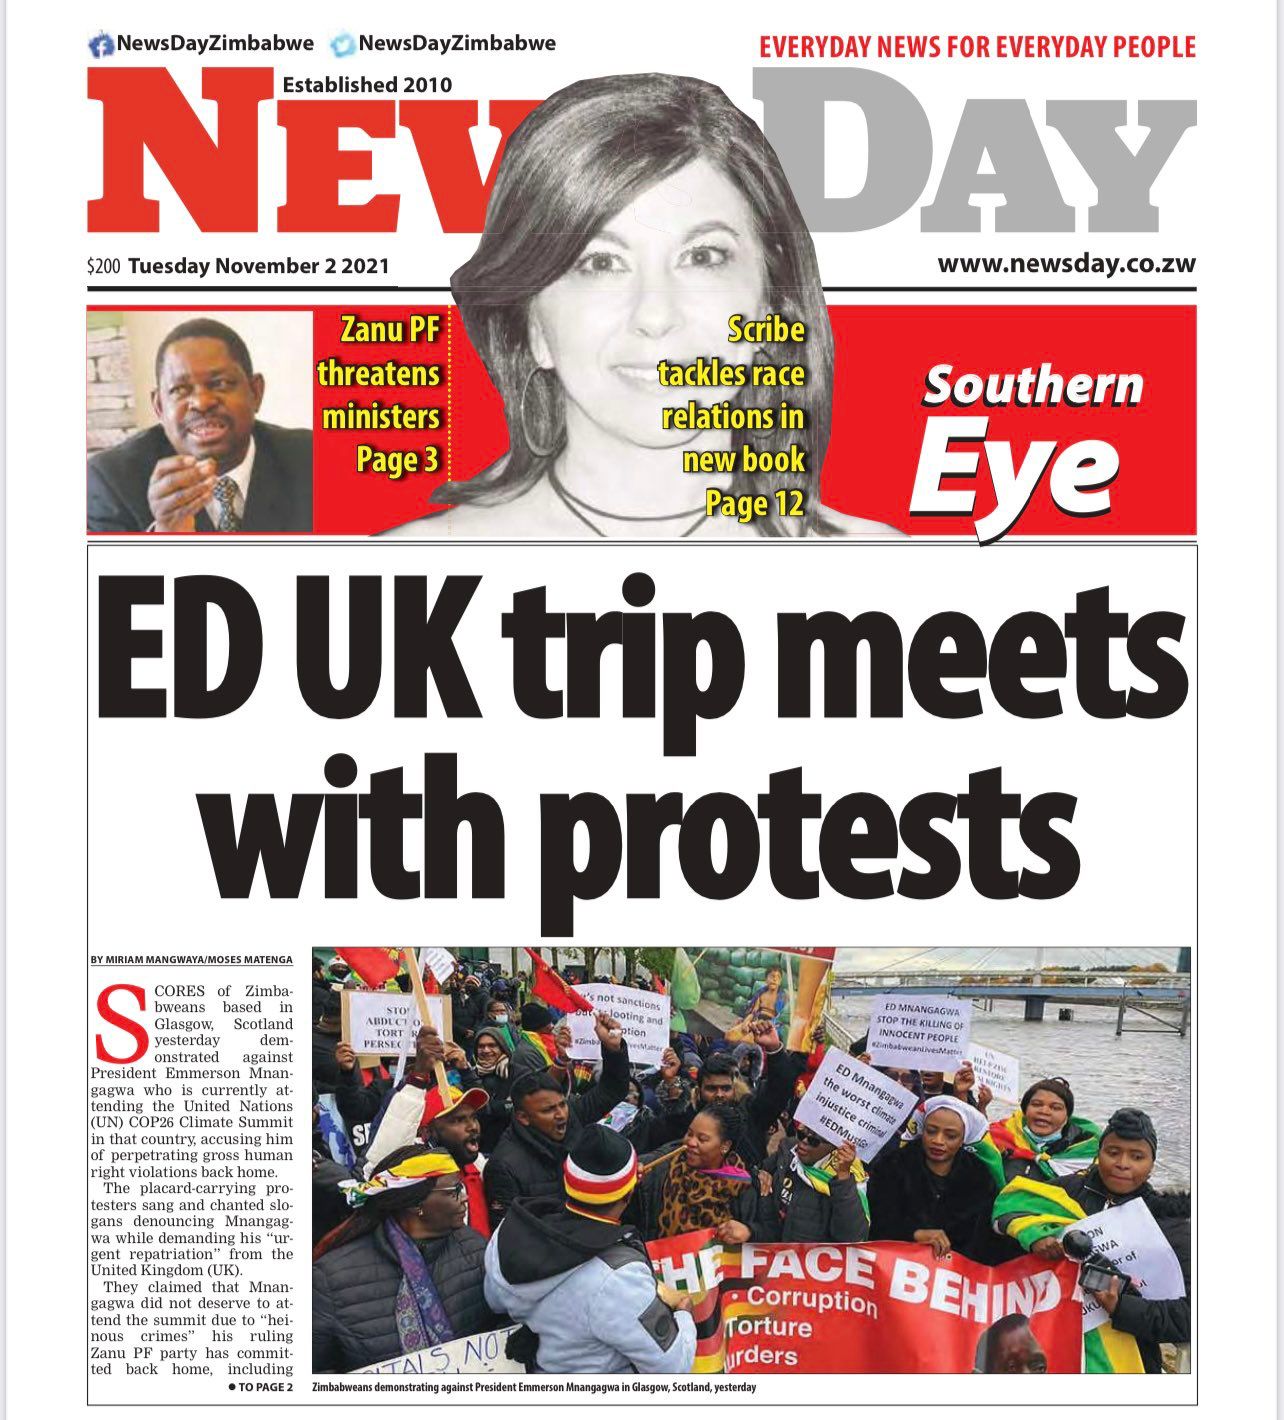 NewsDay Zimbabwe Reports our Protest